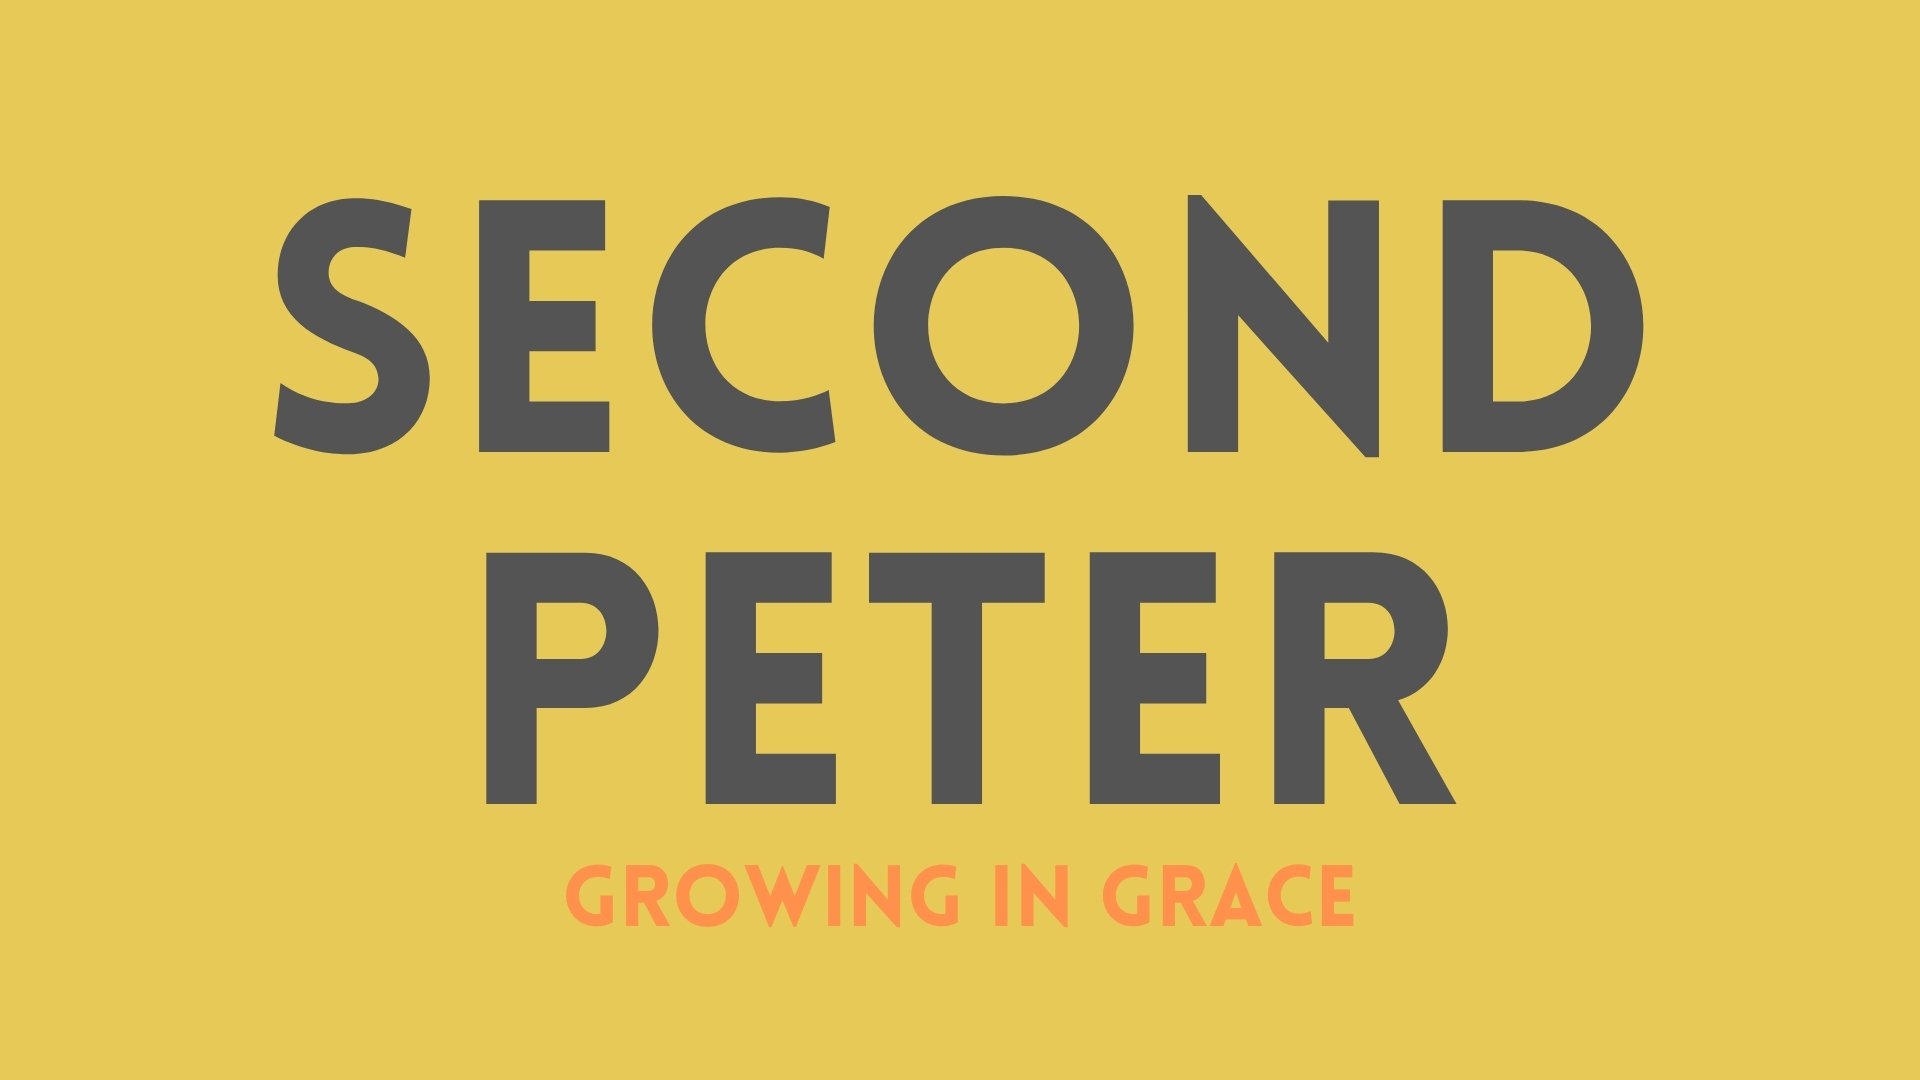 Meet Peter, an Ordinary Man Who Knows Jesus